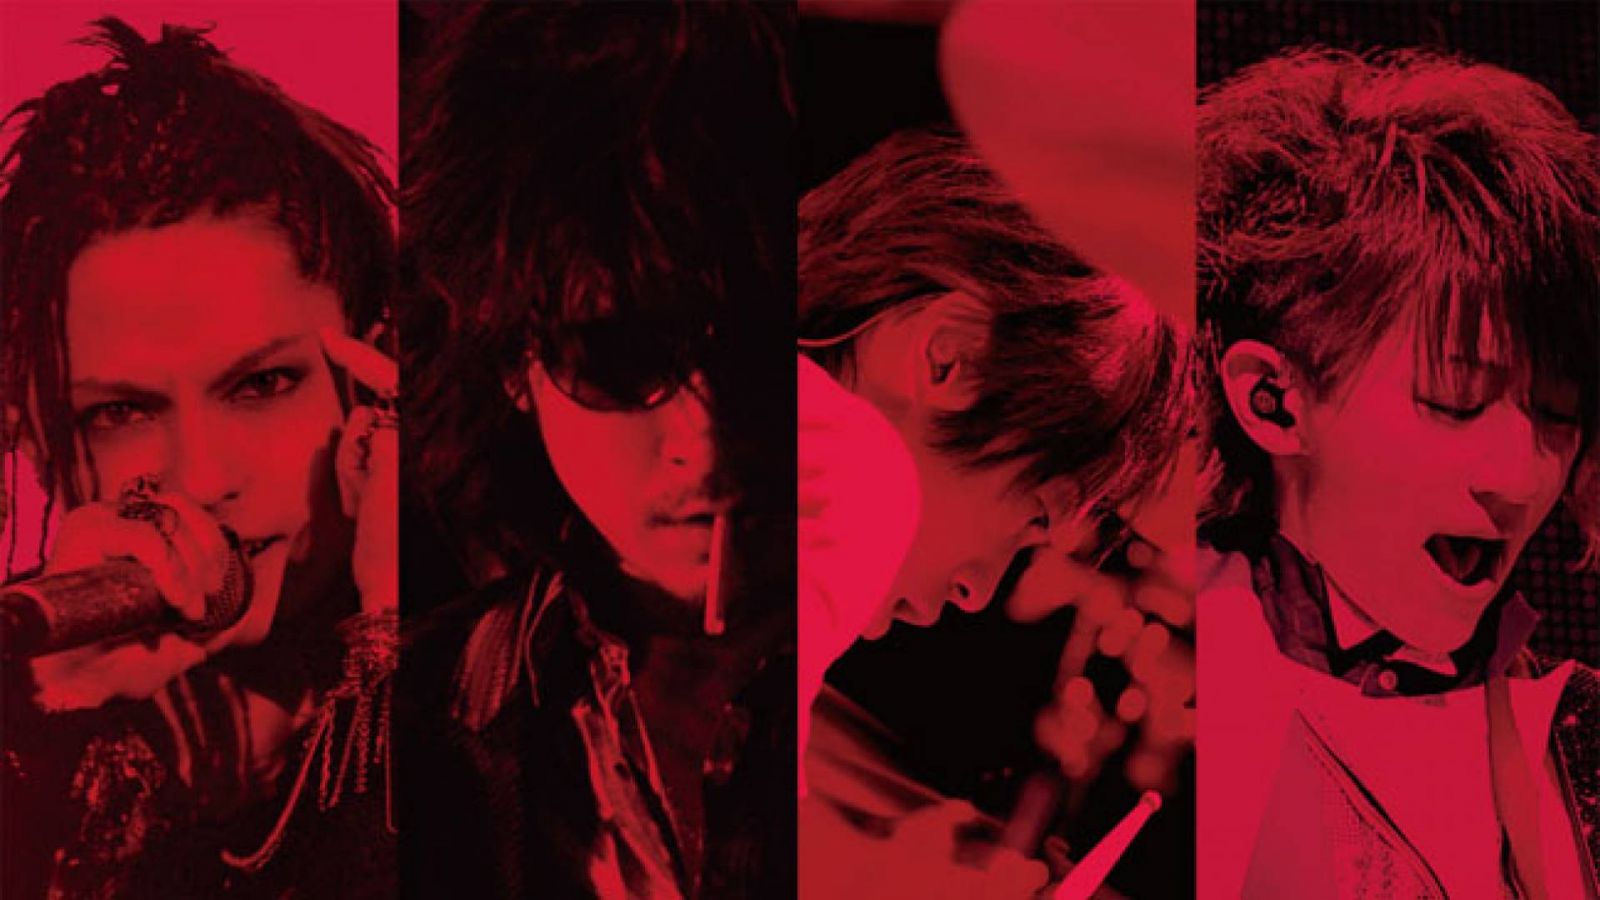 Over The L'Arc-en-Ciel to be Distributed Online with Bonus Footage © 2015 L'Arc~en~Ciel. Provided by Live Viewing Japan.